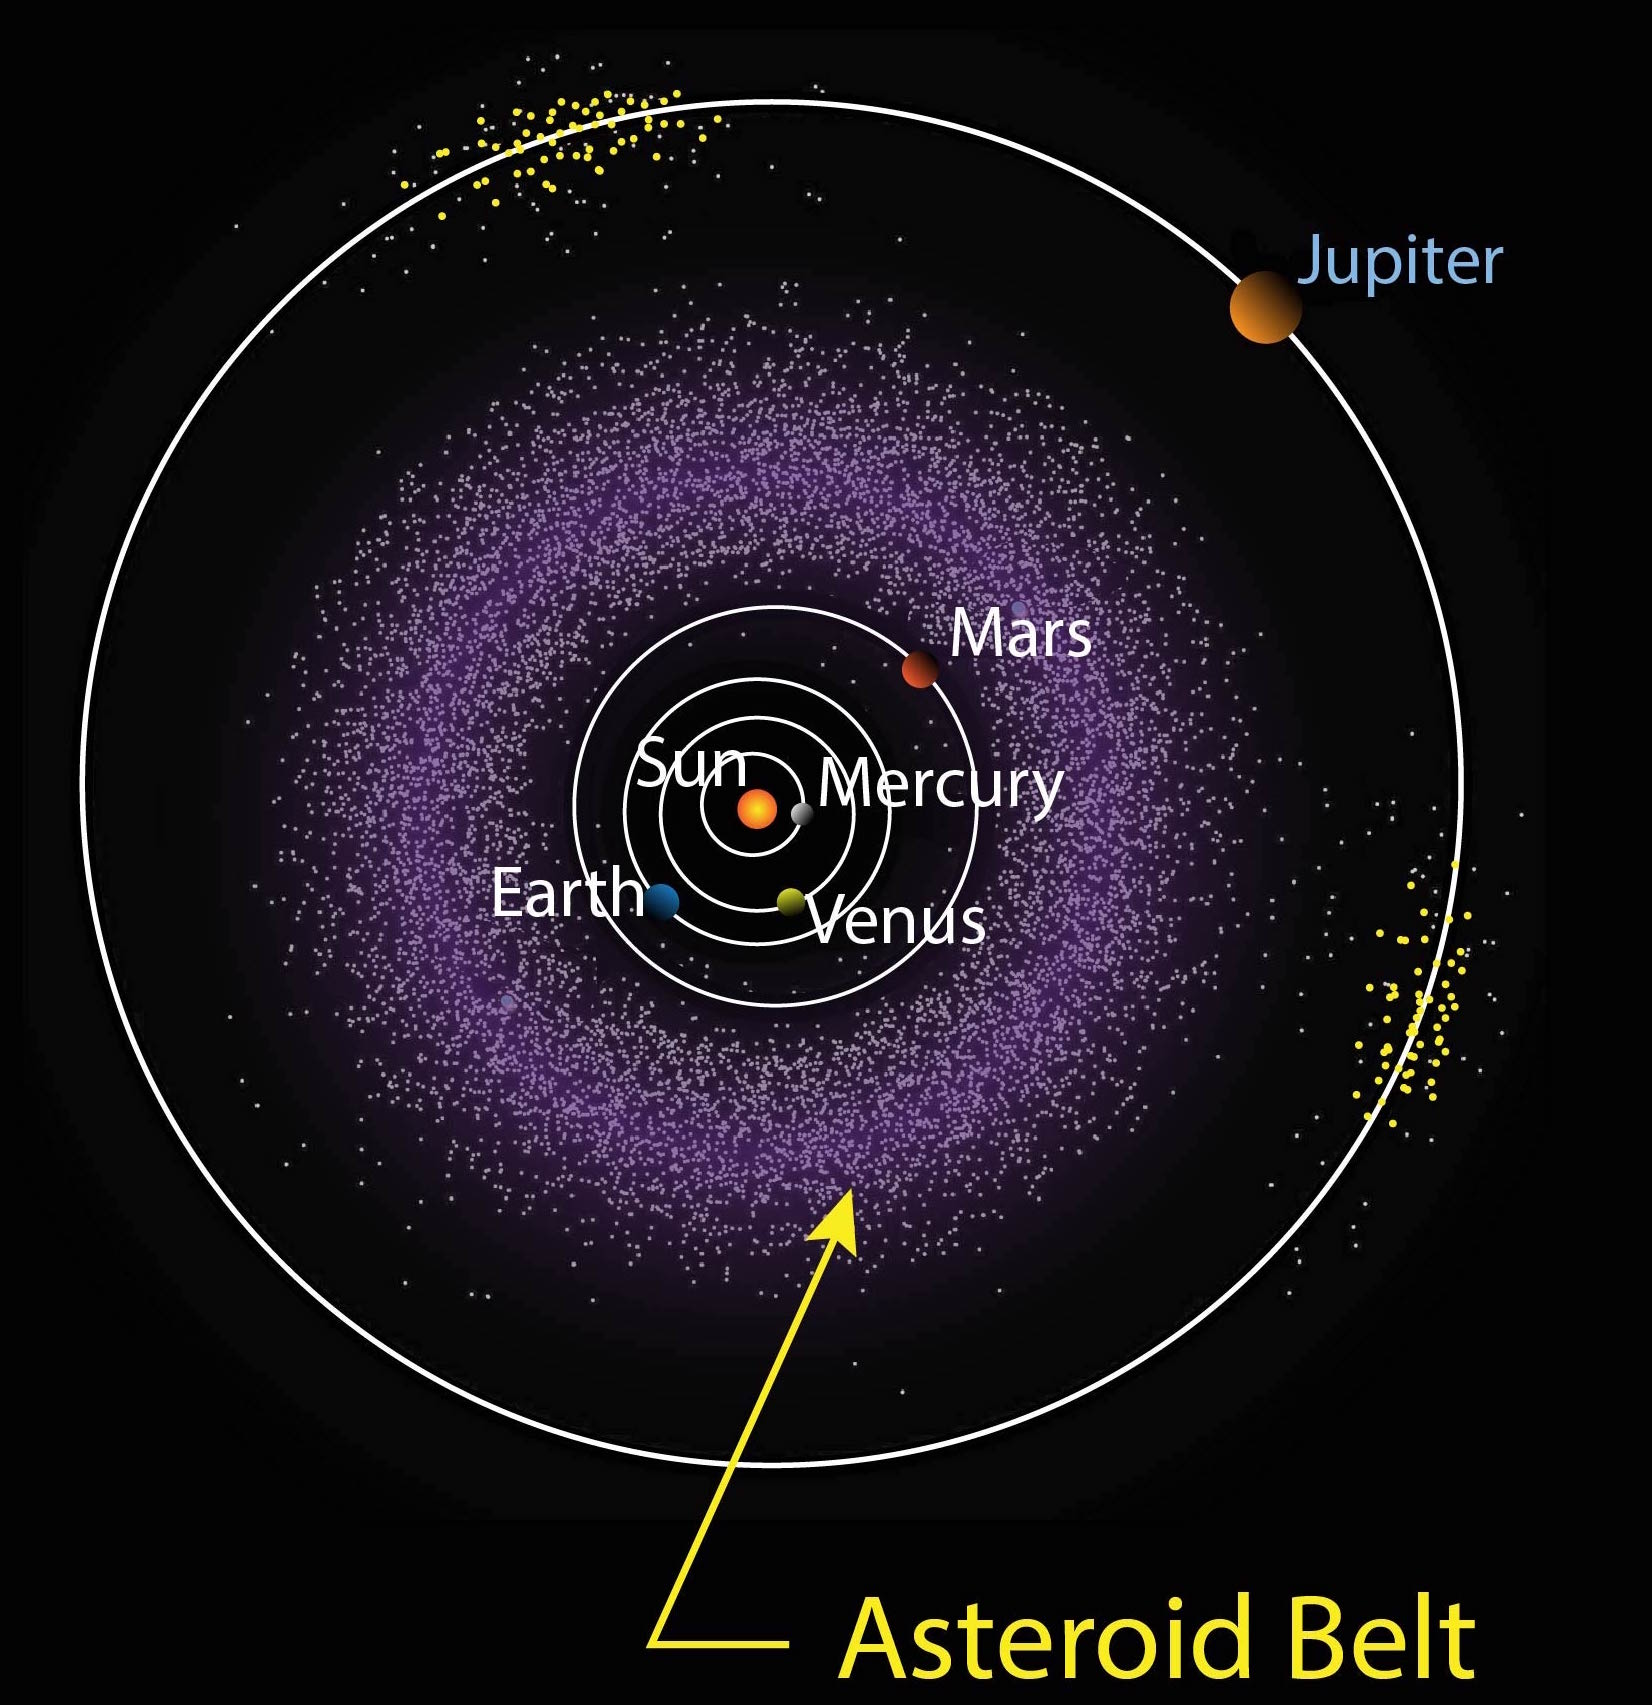 Illustration of the location of the asteroid belt between Mars and Jupiter.